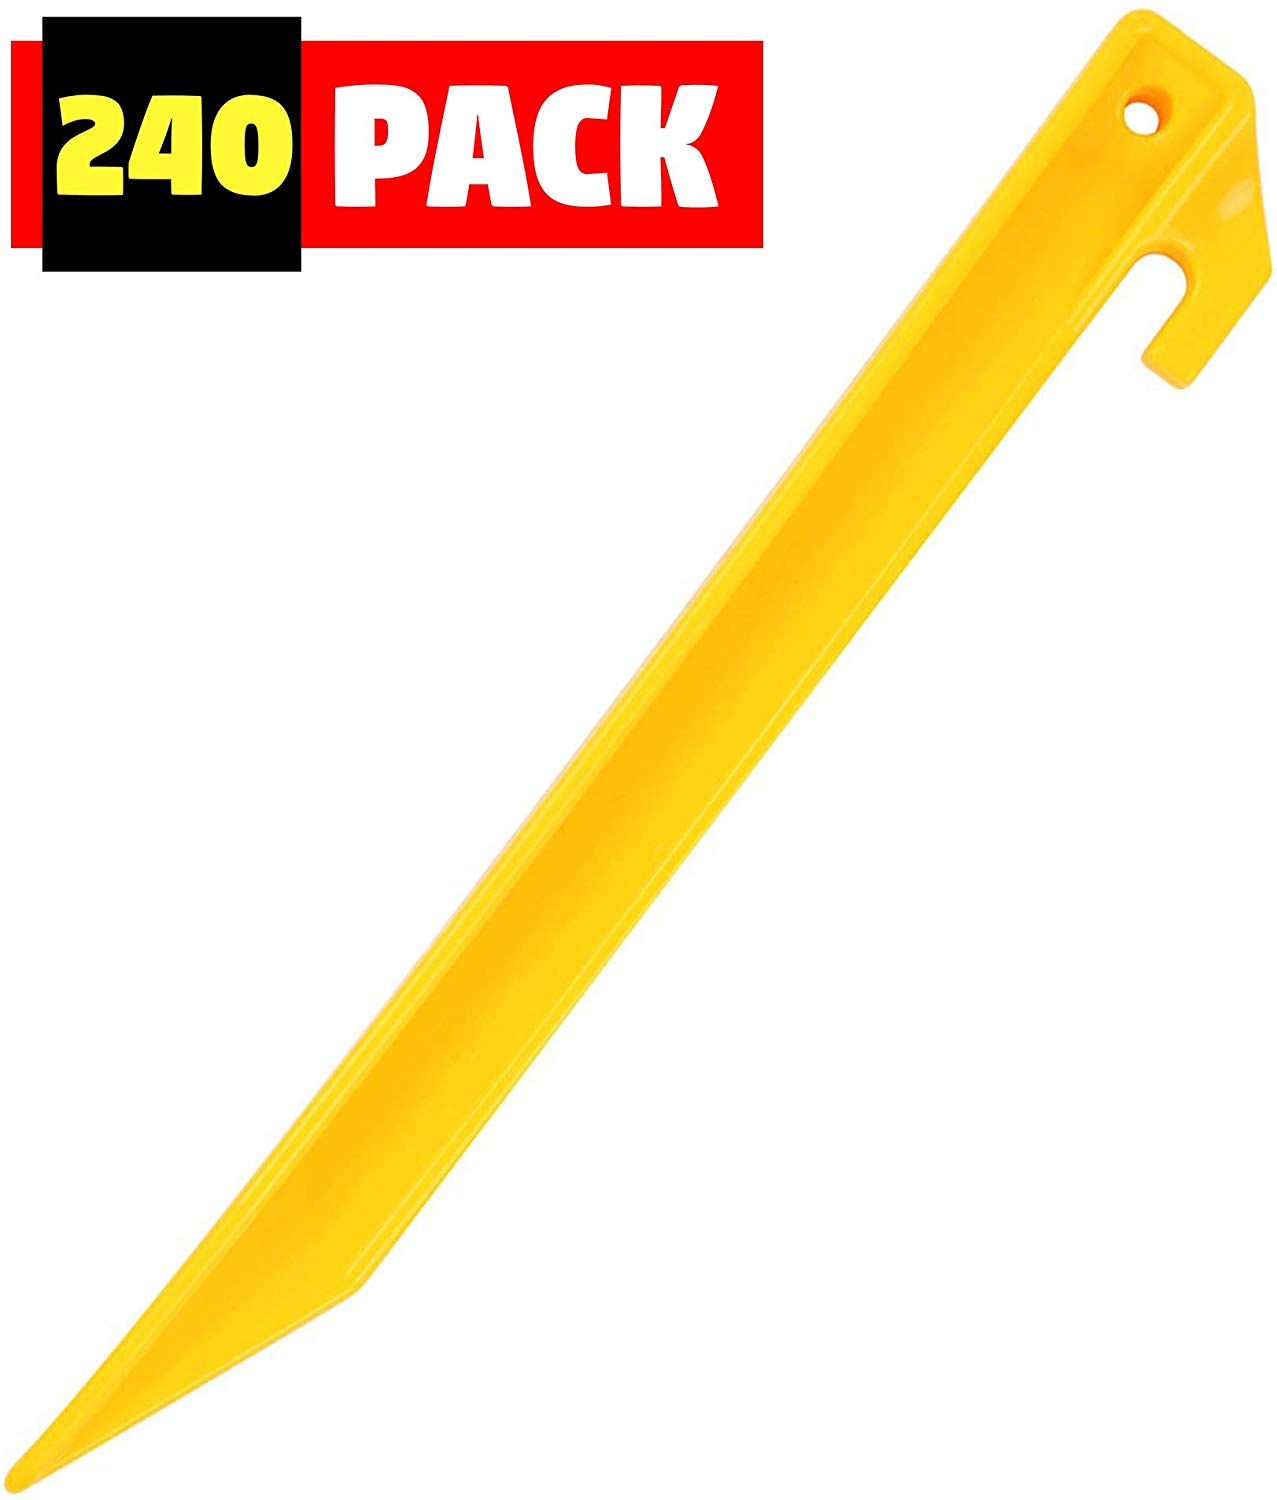 240 Pack Yellow Tent Stakes 9